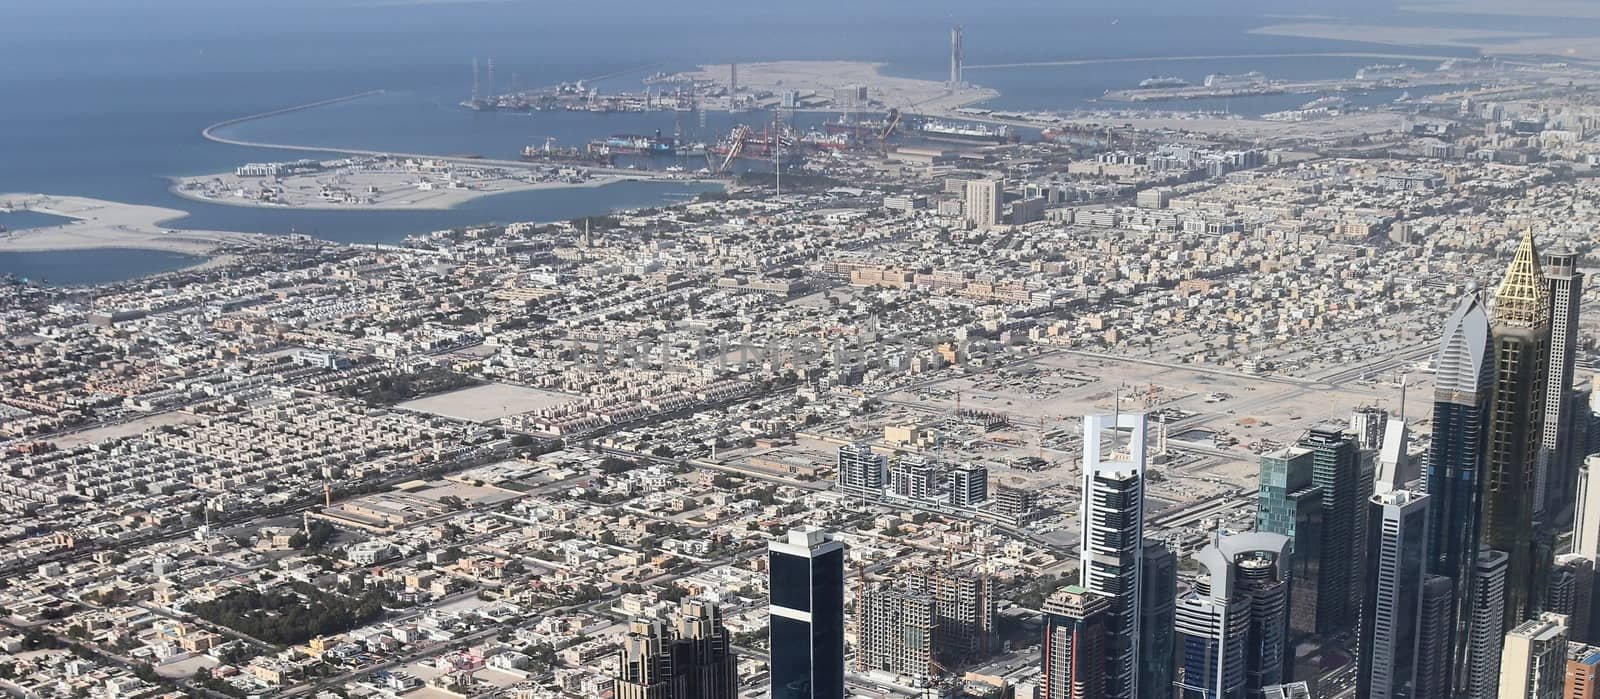 Aerial view over the city center of dubai on a sunny day by MP_foto71